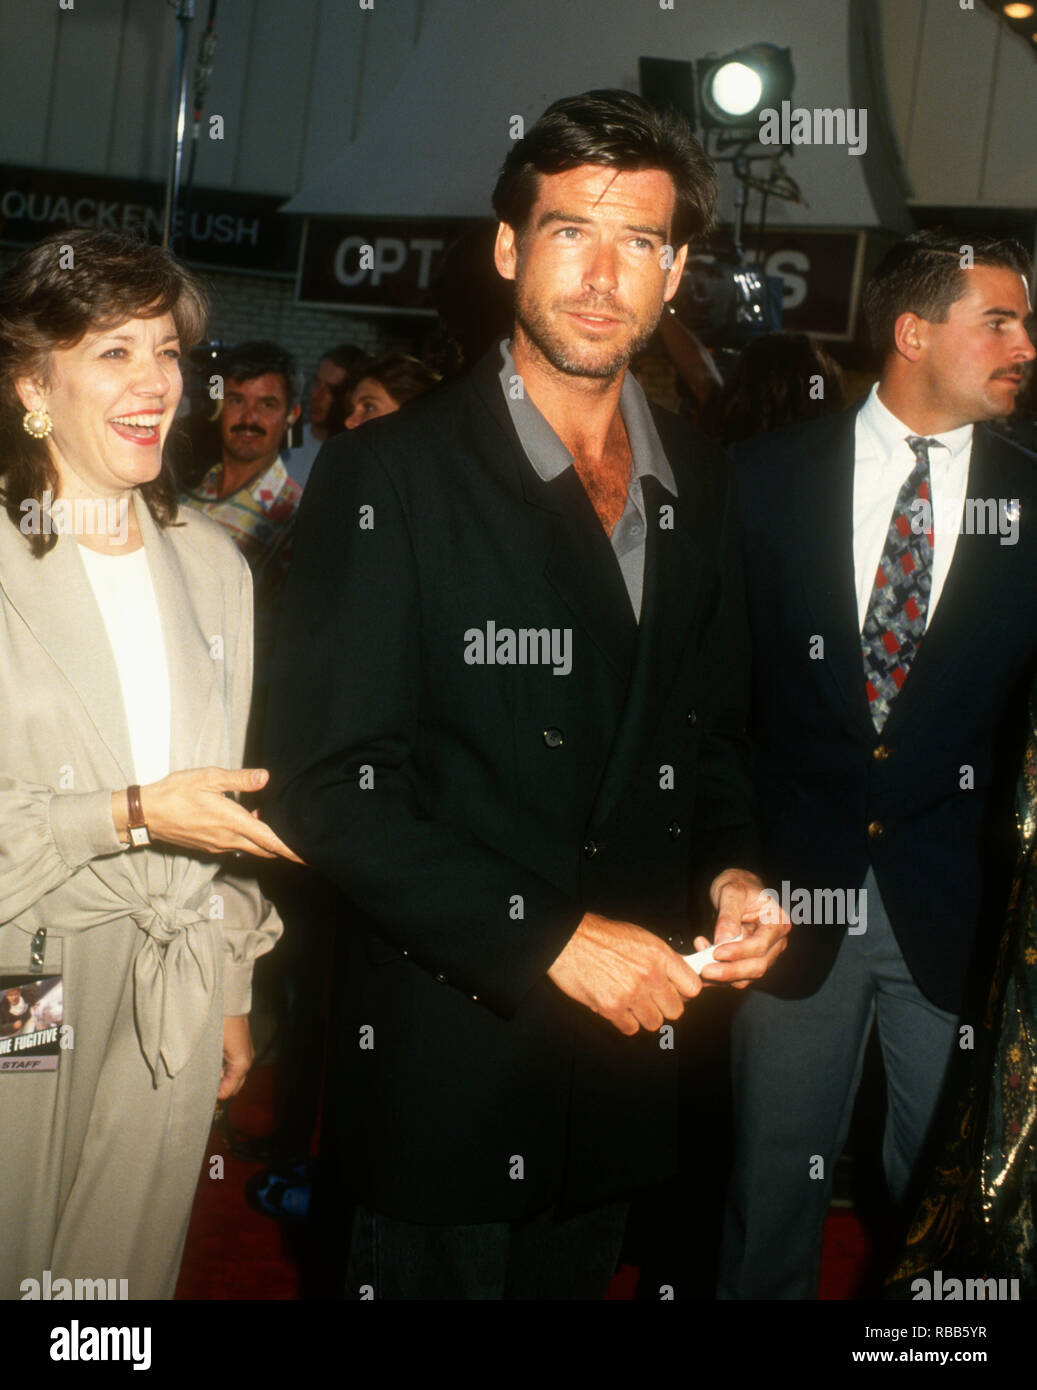 westwood-ca-july-29-actor-pierce-brosnan-attends-warner-bros-pictures-the-fugitive-premiere-on-july-29-1993-at-the-mann-village-theatre-in-westwood-california-photo-by-barry-kingalamy-stock-photo-RBB5YR.jpg